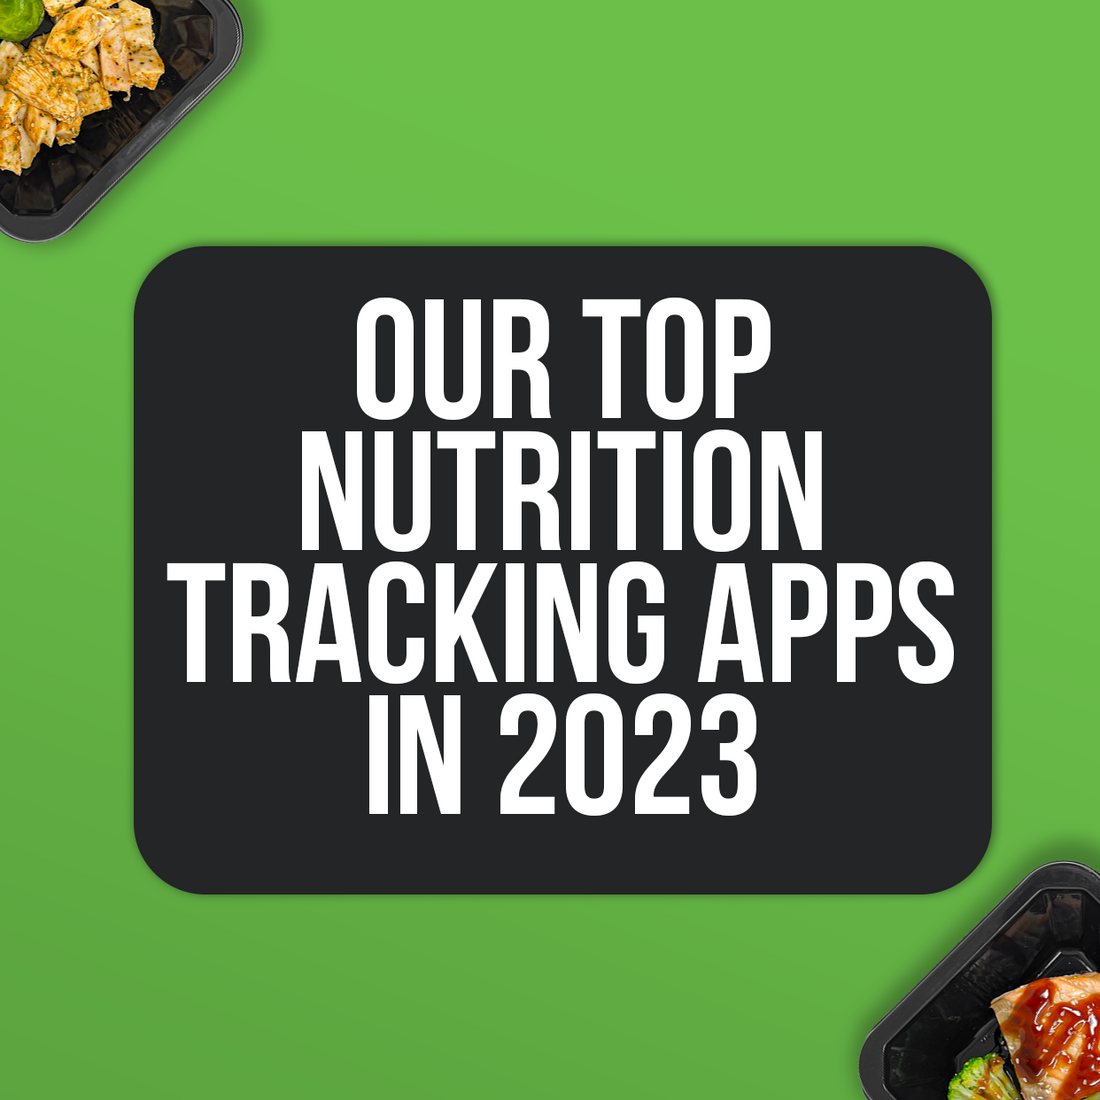 Our Top Nutrition Tracking Apps in 2023